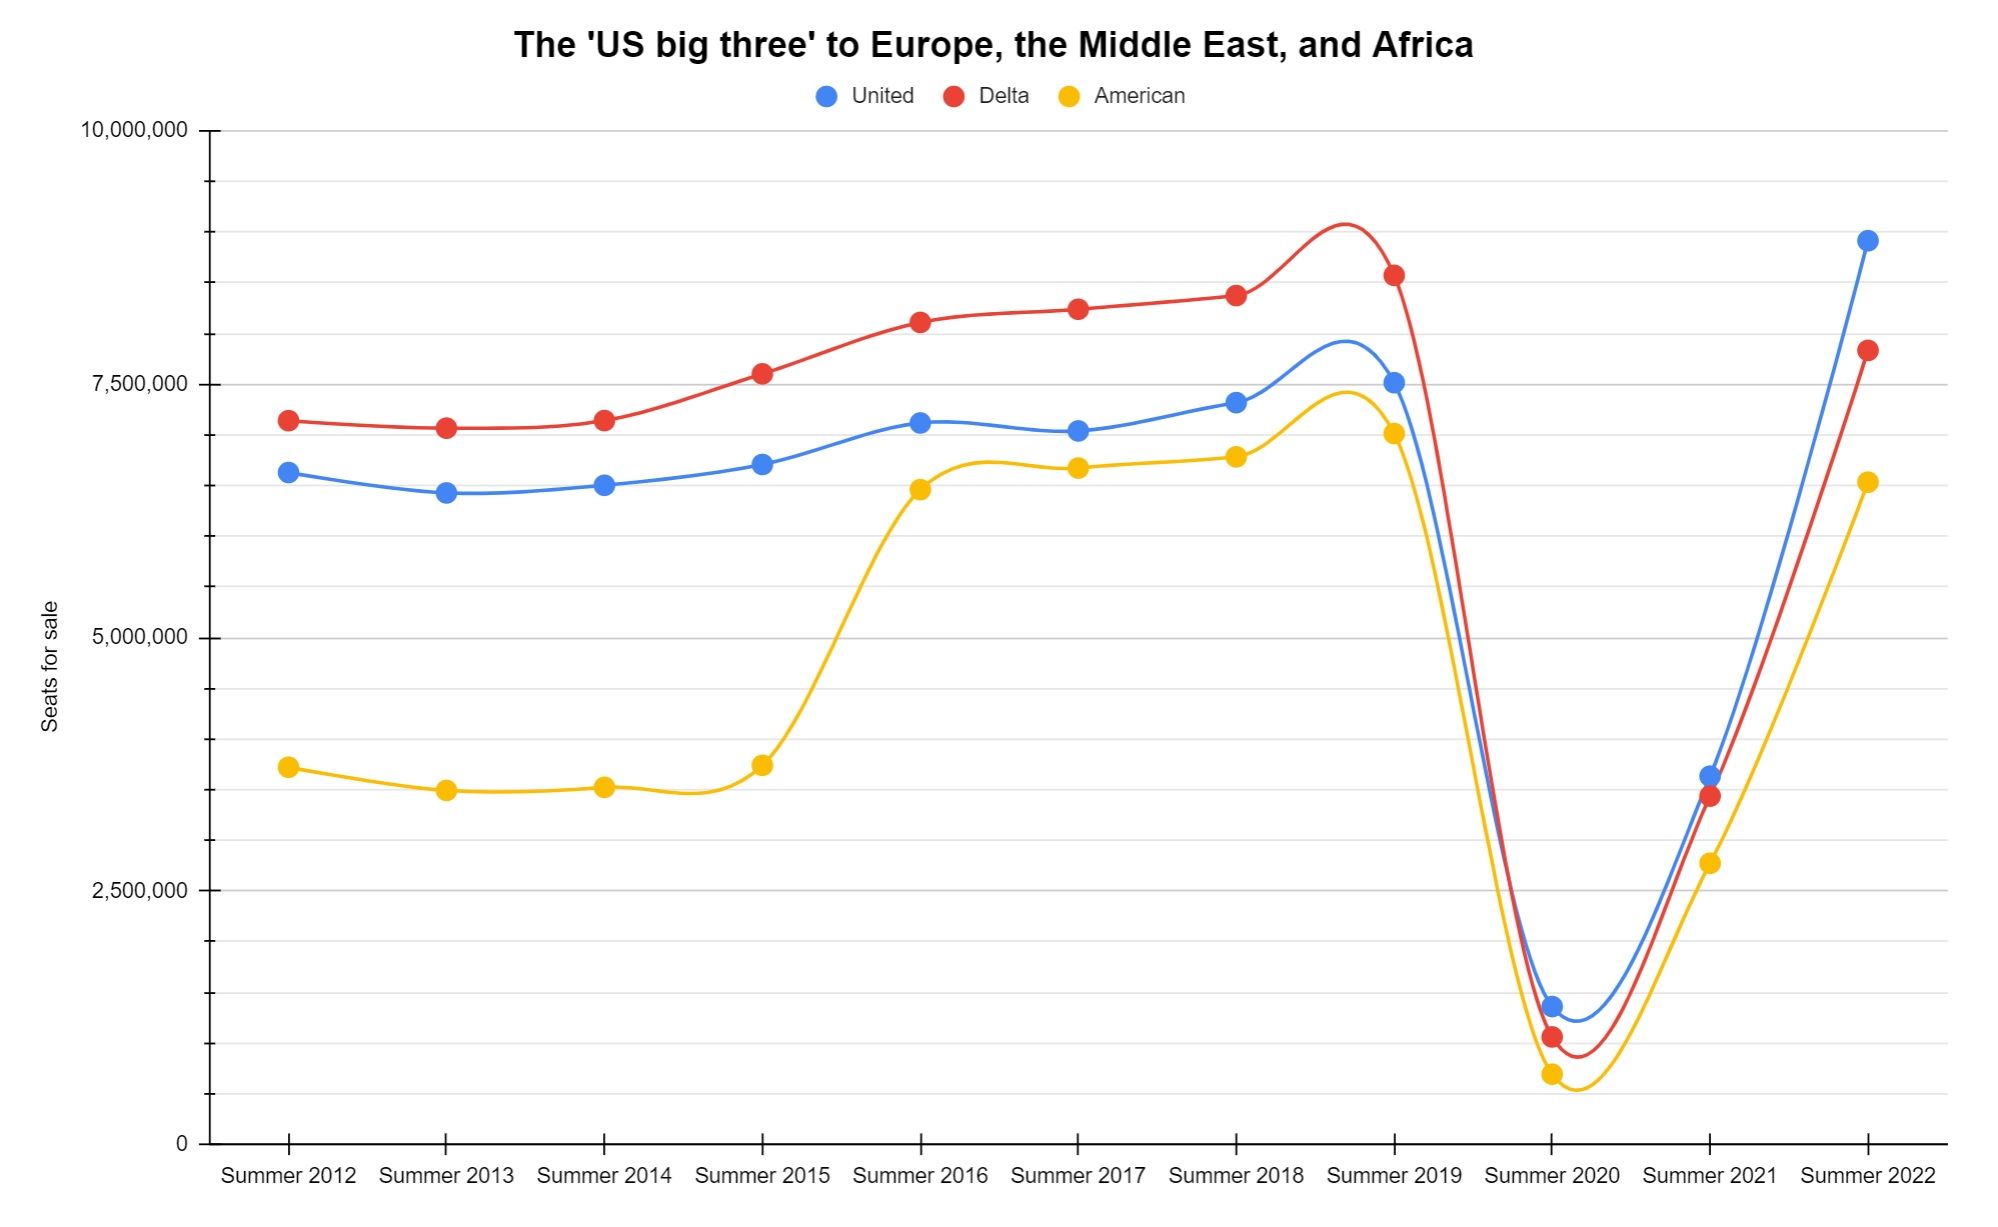 United, Delta, and American's capacity to Europe, Middle East, Africa